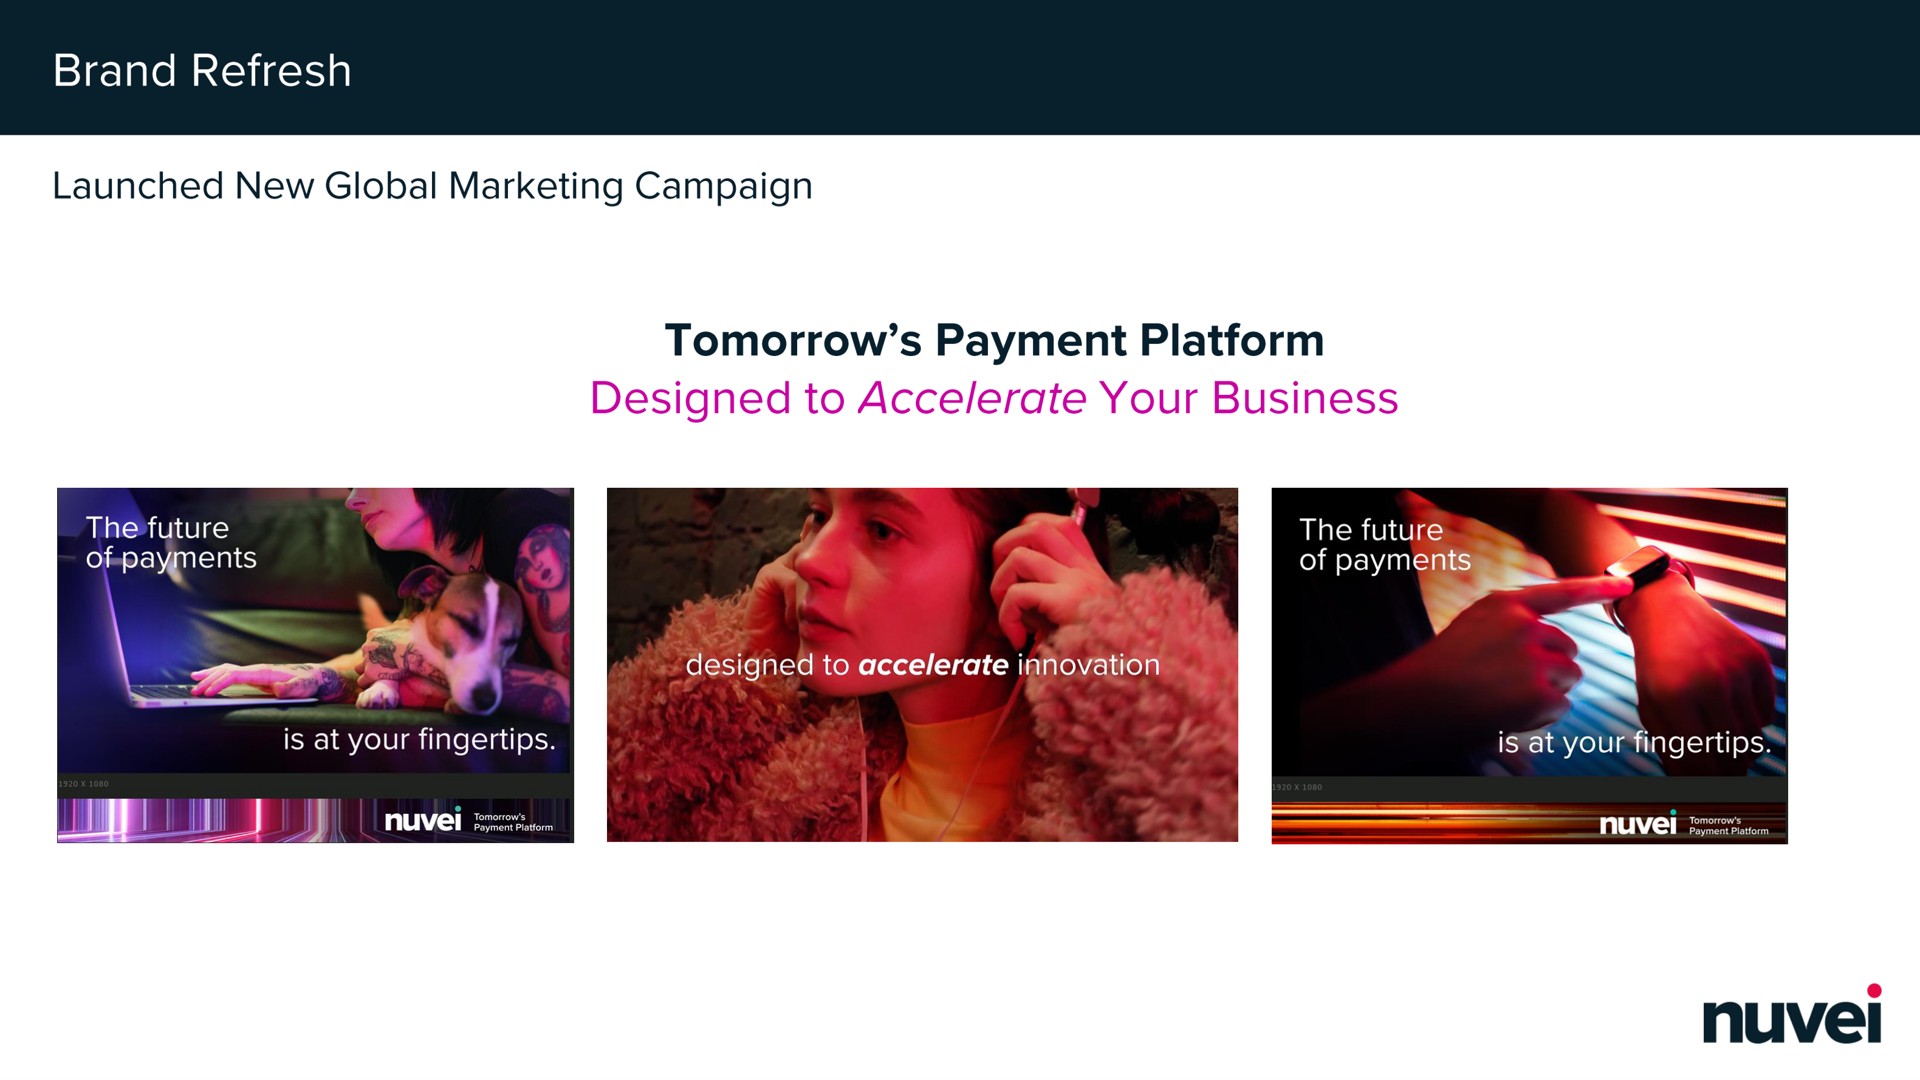 brand refresh launched new global marketing campaign tomorrow payment platform designed to your business i | Nuvei